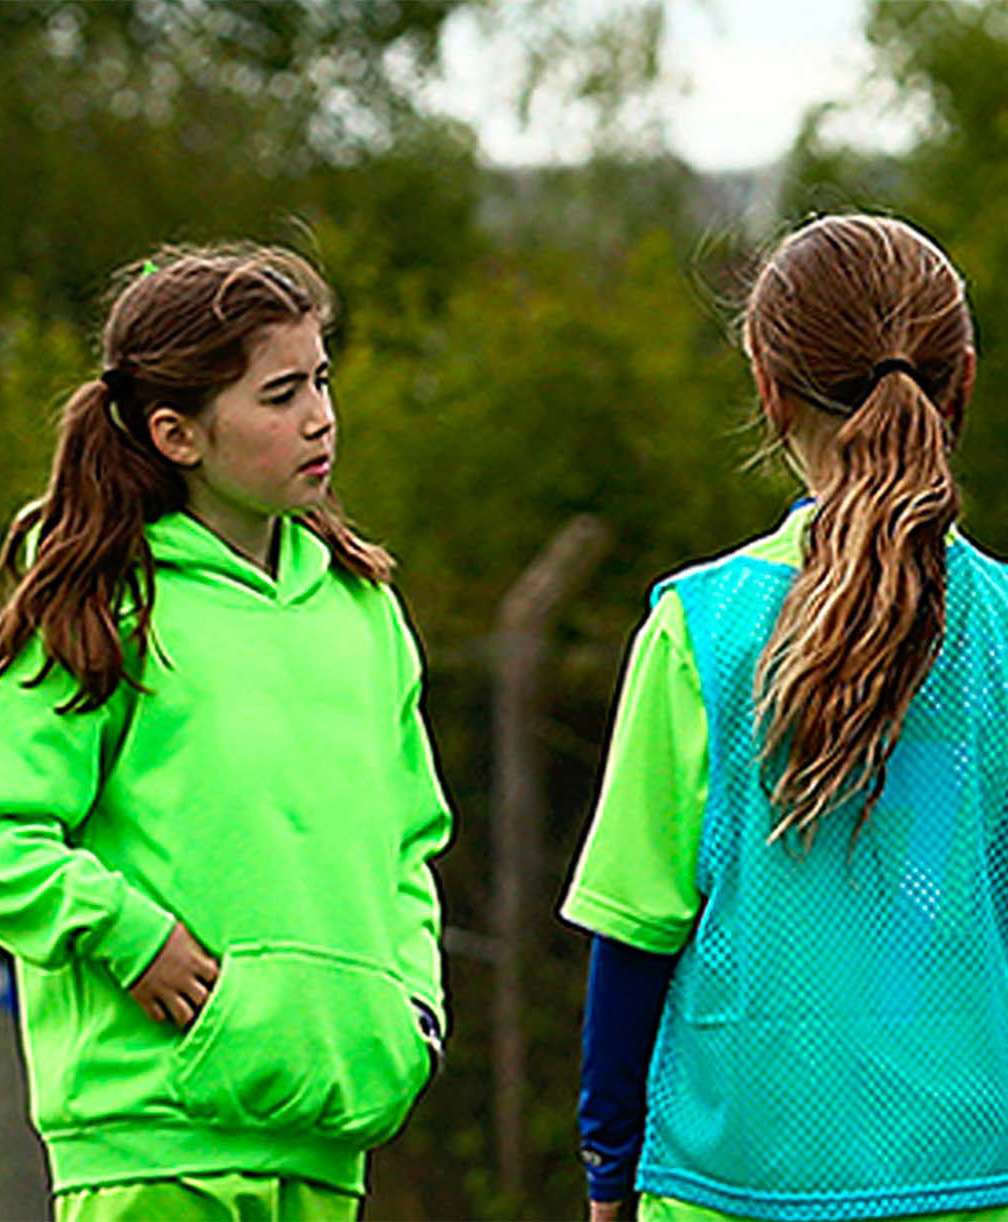 3 young female players wearing green kits look at their coach, a female wearing black.